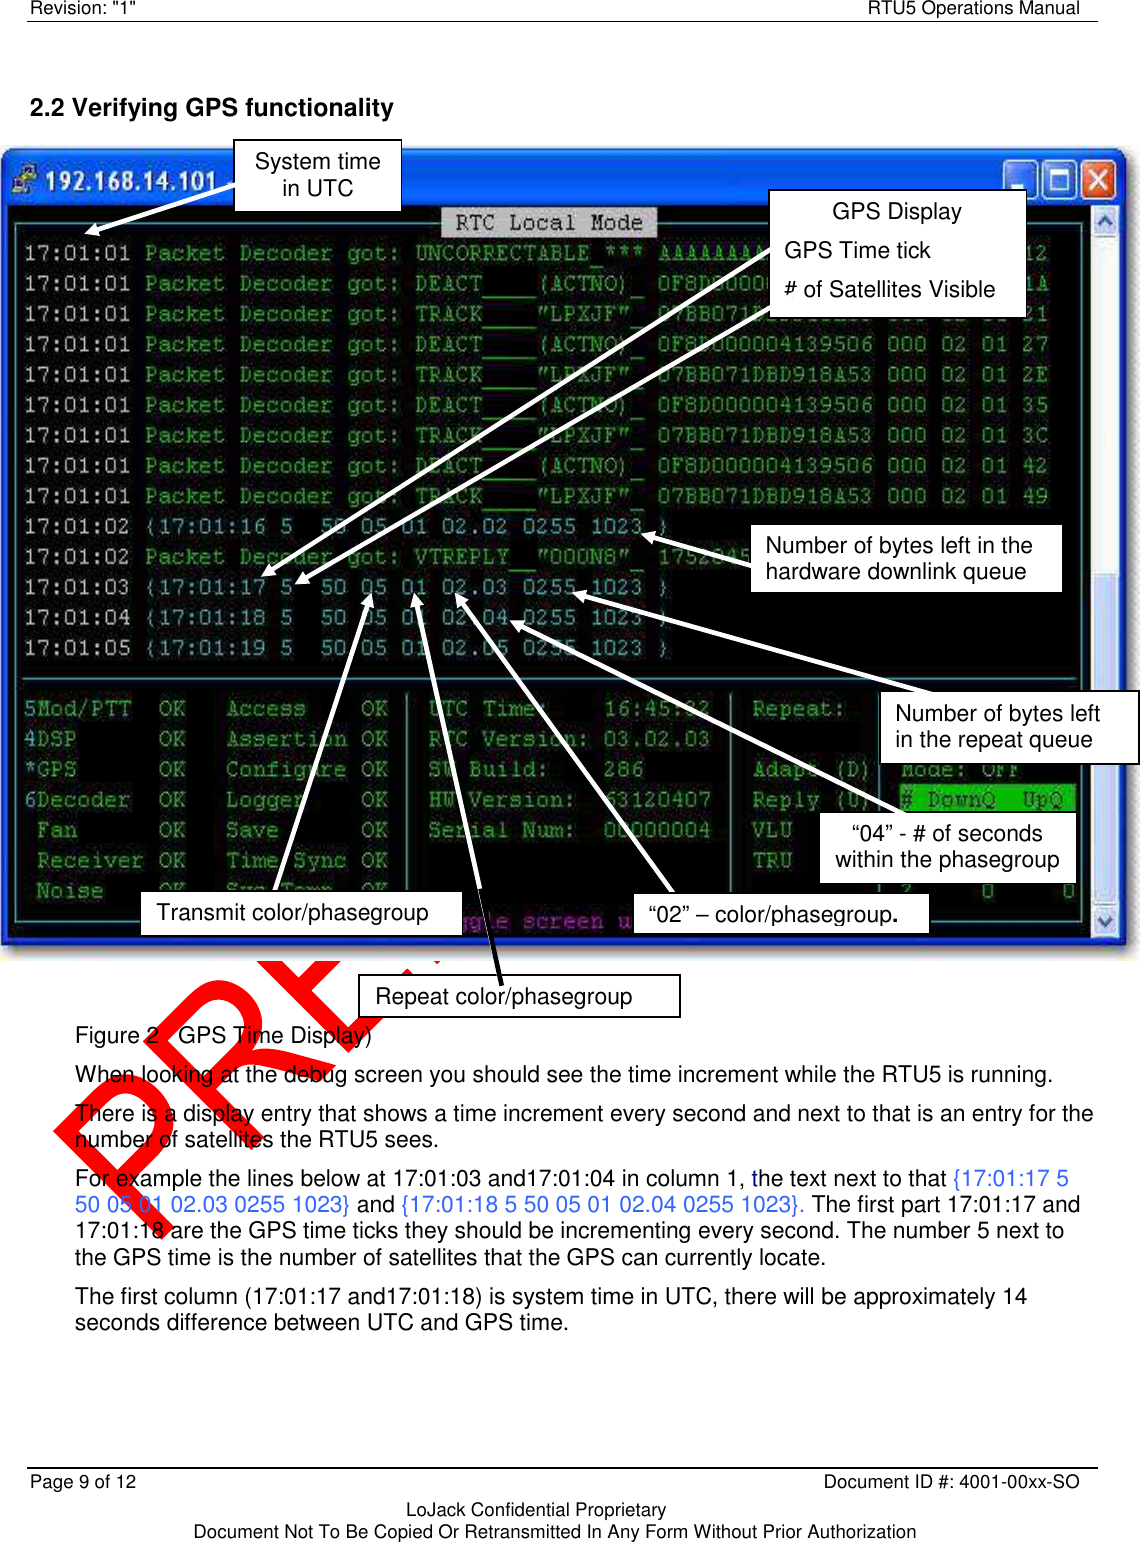 Revision: &quot;1&quot;    RTU5 Operations Manual Page 9 of 12    Document ID #: 4001-00xx-SO   LoJack Confidential Proprietary  Document Not To Be Copied Or Retransmitted In Any Form Without Prior Authorization  2.2 Verifying GPS functionality                        Figure 2   GPS Time Display) When looking at the debug screen you should see the time increment while the RTU5 is running. There is a display entry that shows a time increment every second and next to that is an entry for the number of satellites the RTU5 sees. For example the lines below at 17:01:03 and17:01:04 in column 1, the text next to that {17:01:17 5 50 05 01 02.03 0255 1023} and {17:01:18 5 50 05 01 02.04 0255 1023}. The first part 17:01:17 and 17:01:18 are the GPS time ticks they should be incrementing every second. The number 5 next to the GPS time is the number of satellites that the GPS can currently locate. The first column (17:01:17 and17:01:18) is system time in UTC, there will be approximately 14 seconds difference between UTC and GPS time.  GPS Display GPS Time tick # of Satellites Visible System time in UTC Repeat color/phasegroup “04” - # of seconds within the phasegroup Number of bytes left in the repeat queue Number of bytes left in the hardware downlink queue Transmit color/phasegroup “02” – color/phasegroup. 